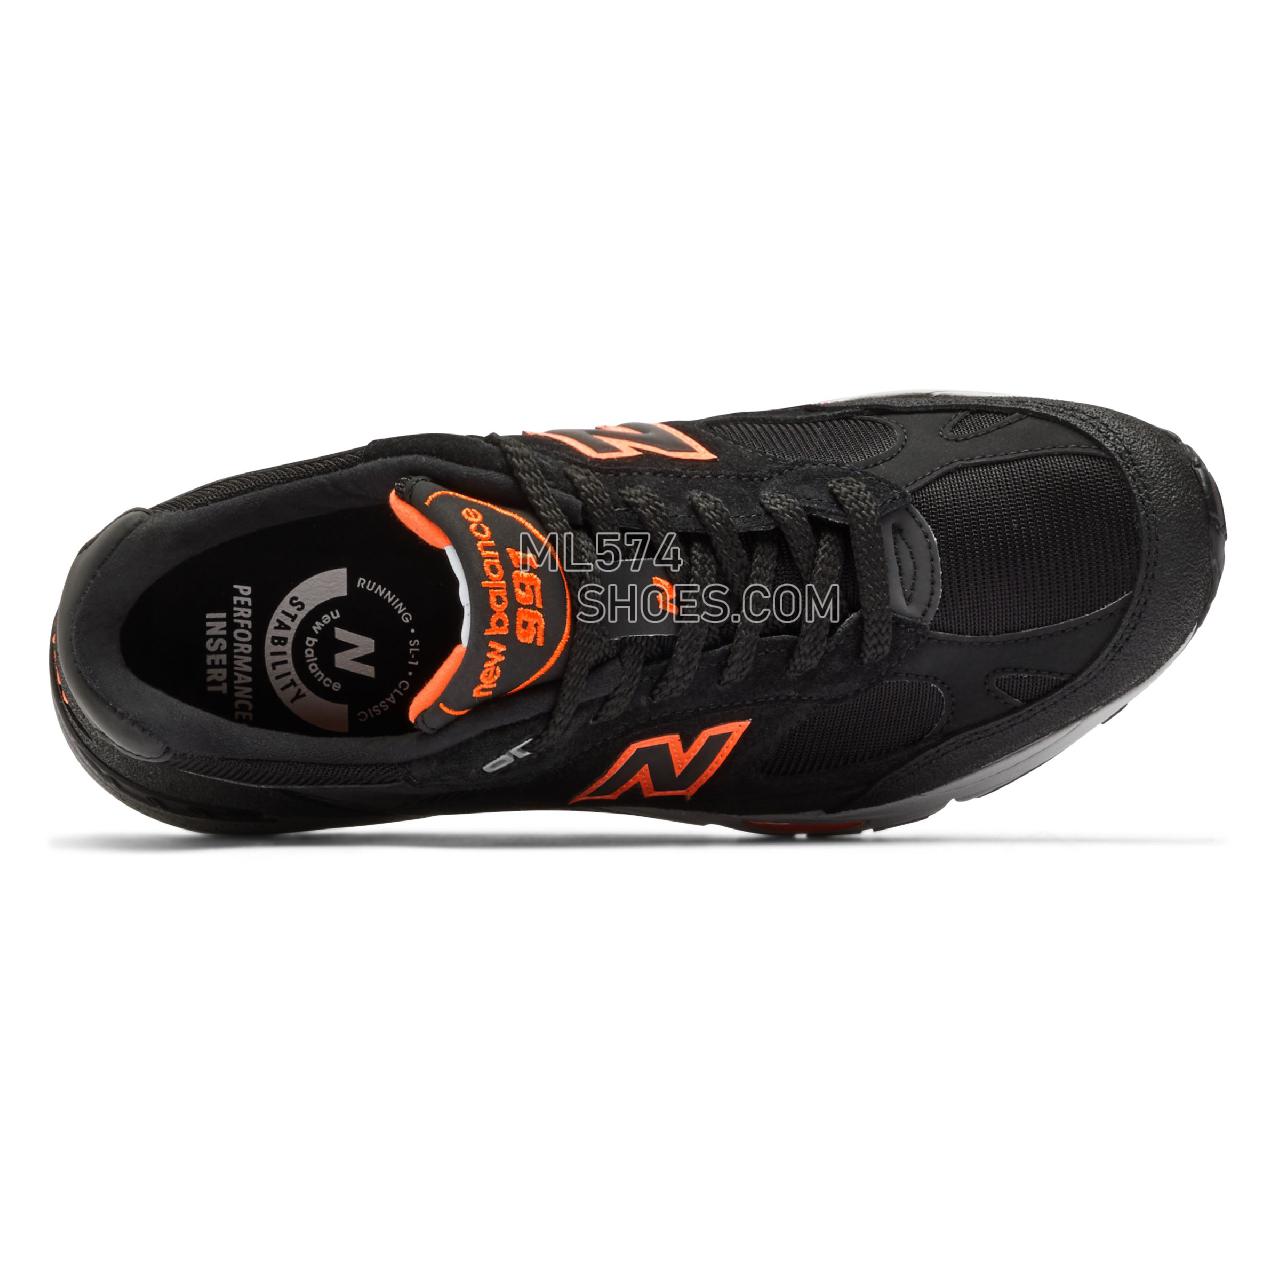 New Balance Made in UK 991 - Men's Made in USA And UK Sneakers - Black with Neon Orange - M991NEO